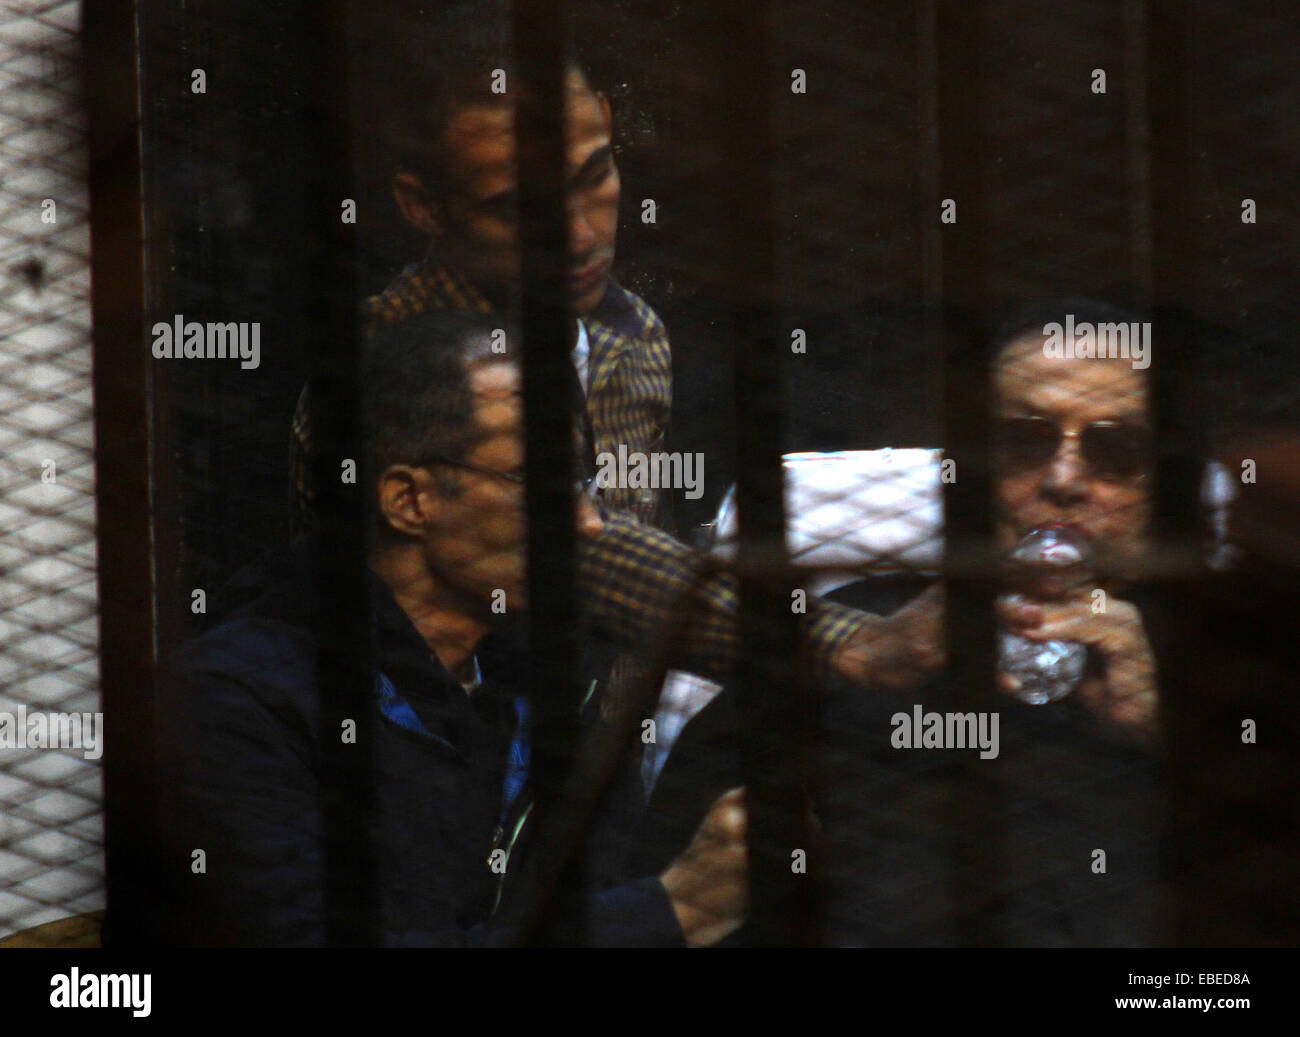 Cairo, Egypt. 29th Nov, 2014. Egypt's former president Hosni Mubarak with his son Gamal Mubarak are seen inside the court in Cairo, Egypt, Nov. 29, 2014 after a court dismissed a murder charge against the ousted leader over the deaths of protesters during a 2011 uprising that ended the former strongman's decades-long rule. The court also acquitted Mubarak of a corruption charge, but he will remain in prison because he is serving a three-year sentence in a separate corruption case © Stringer/APA Images/ZUMA Wire/Alamy Live News Stock Photo